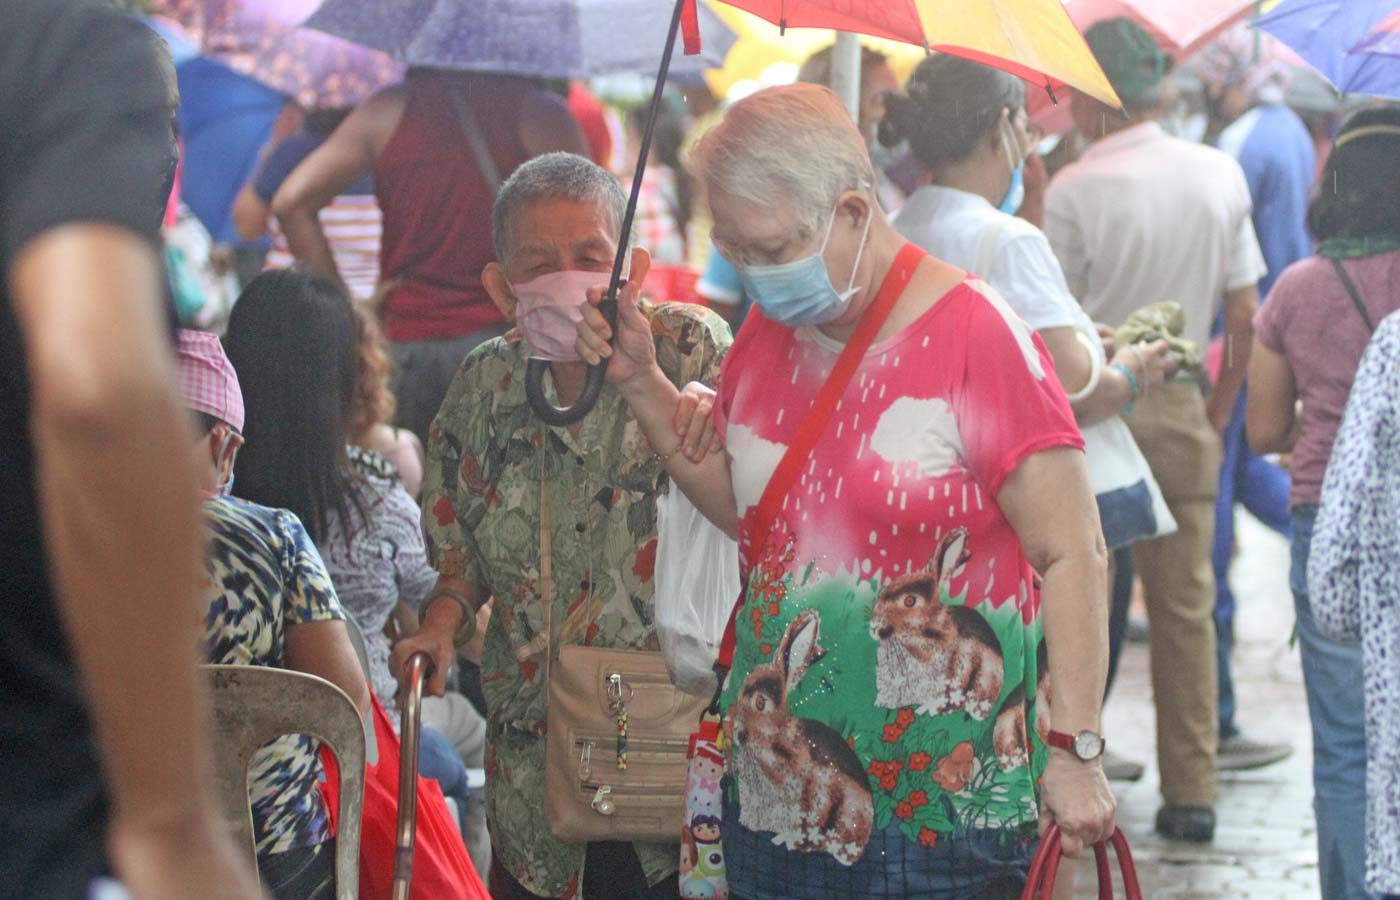 ‘Protection, not restriction’: Group asks gov’t for clear guidelines for senior citizens